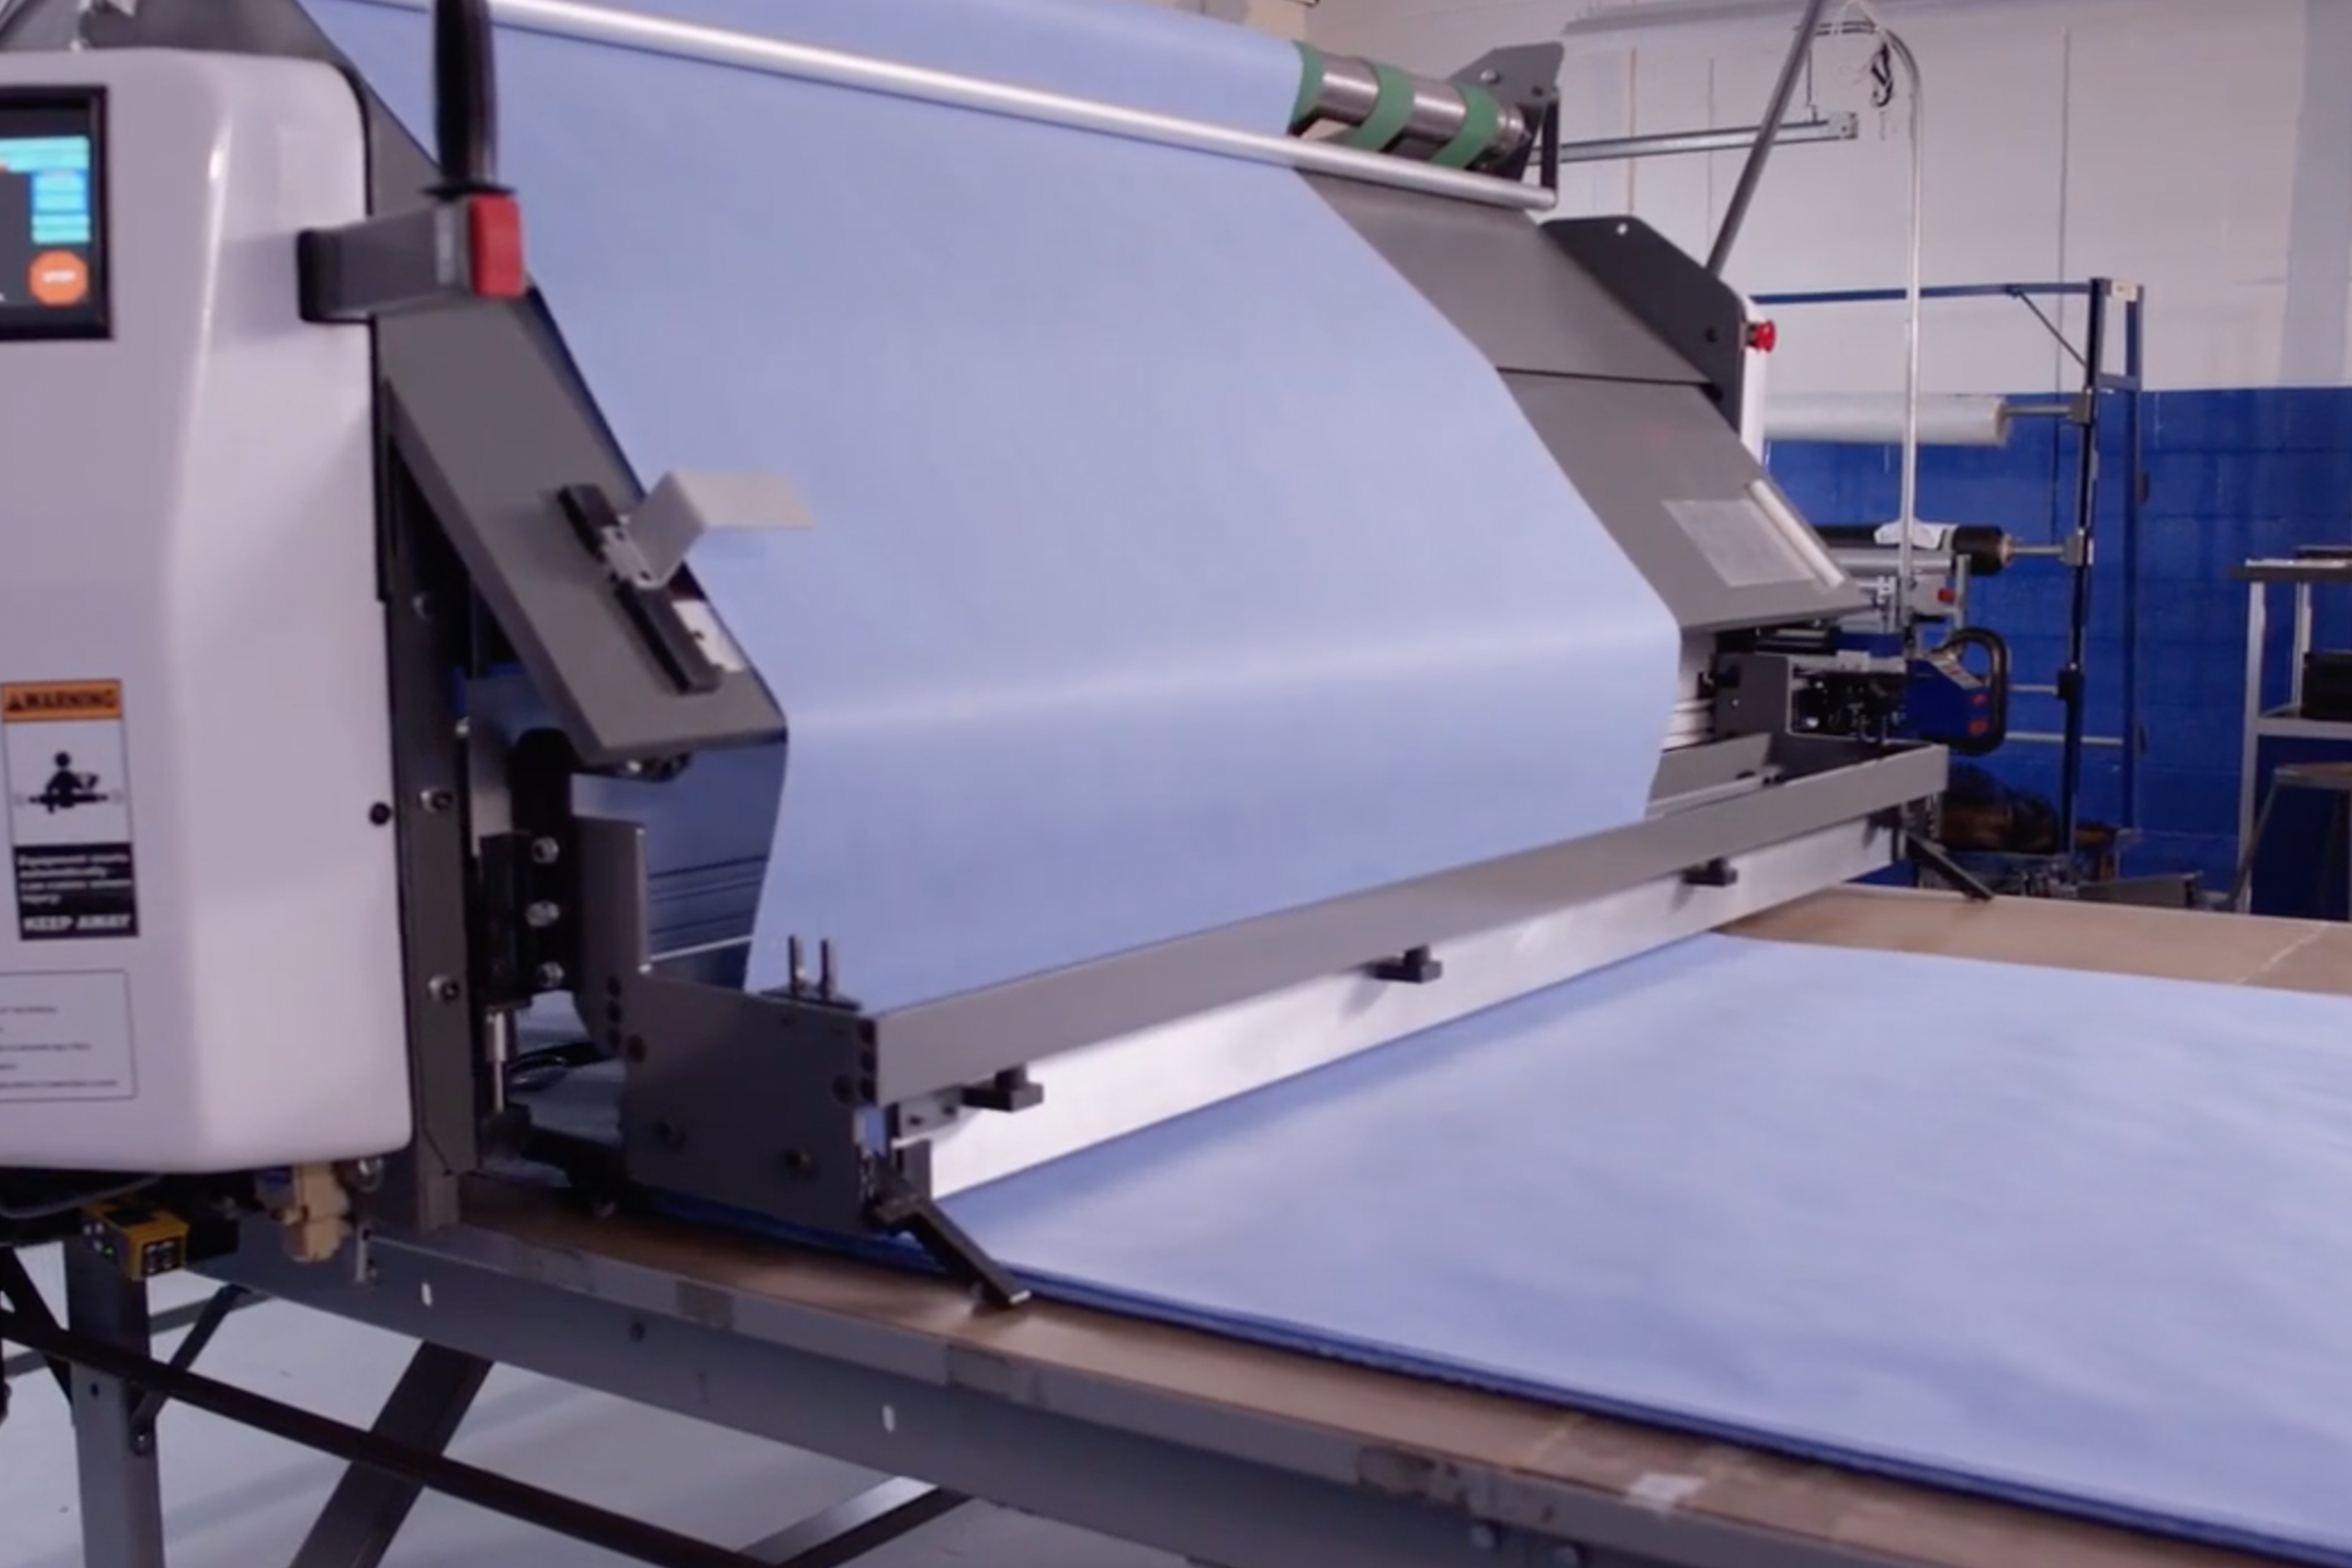 spreader places blue material on cutting surface